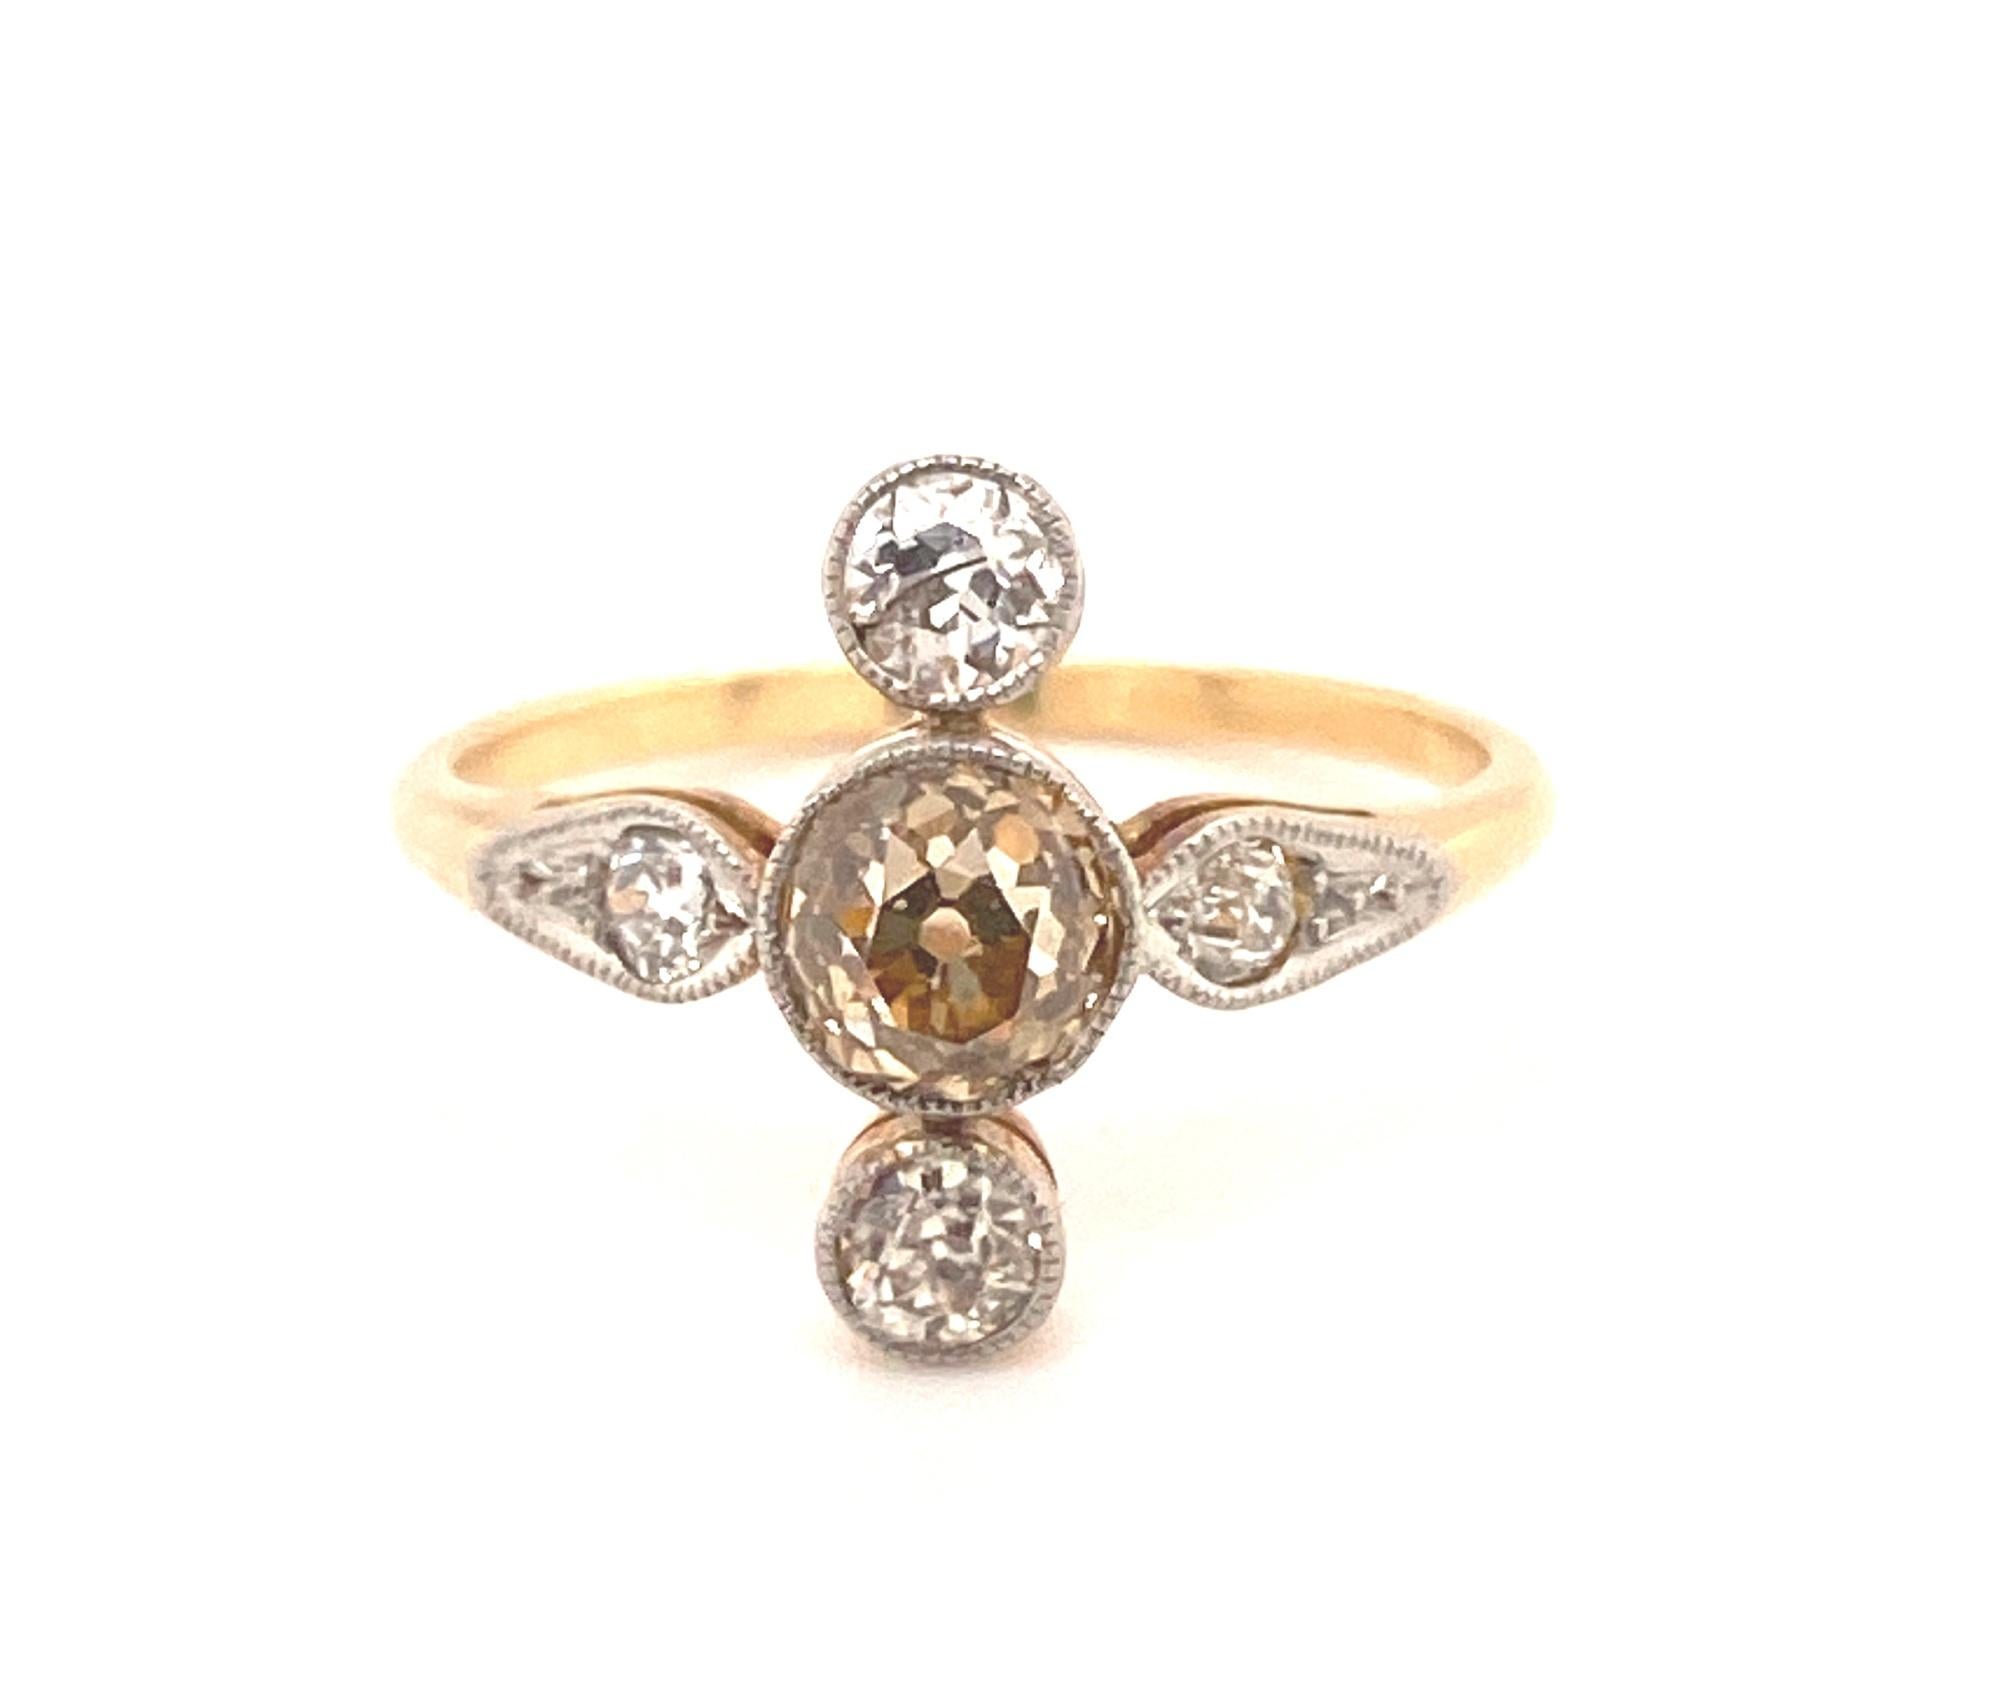 Original Art Deco Fancy Cognac White Diamonds 18K Yellow Gold Ring. This ring has a beautiful and unique design c.1930s. In the center it is set with a .65 carat old mine fancy cognac diamond VS-2 clarity. There are 4 additional old mine cuts that